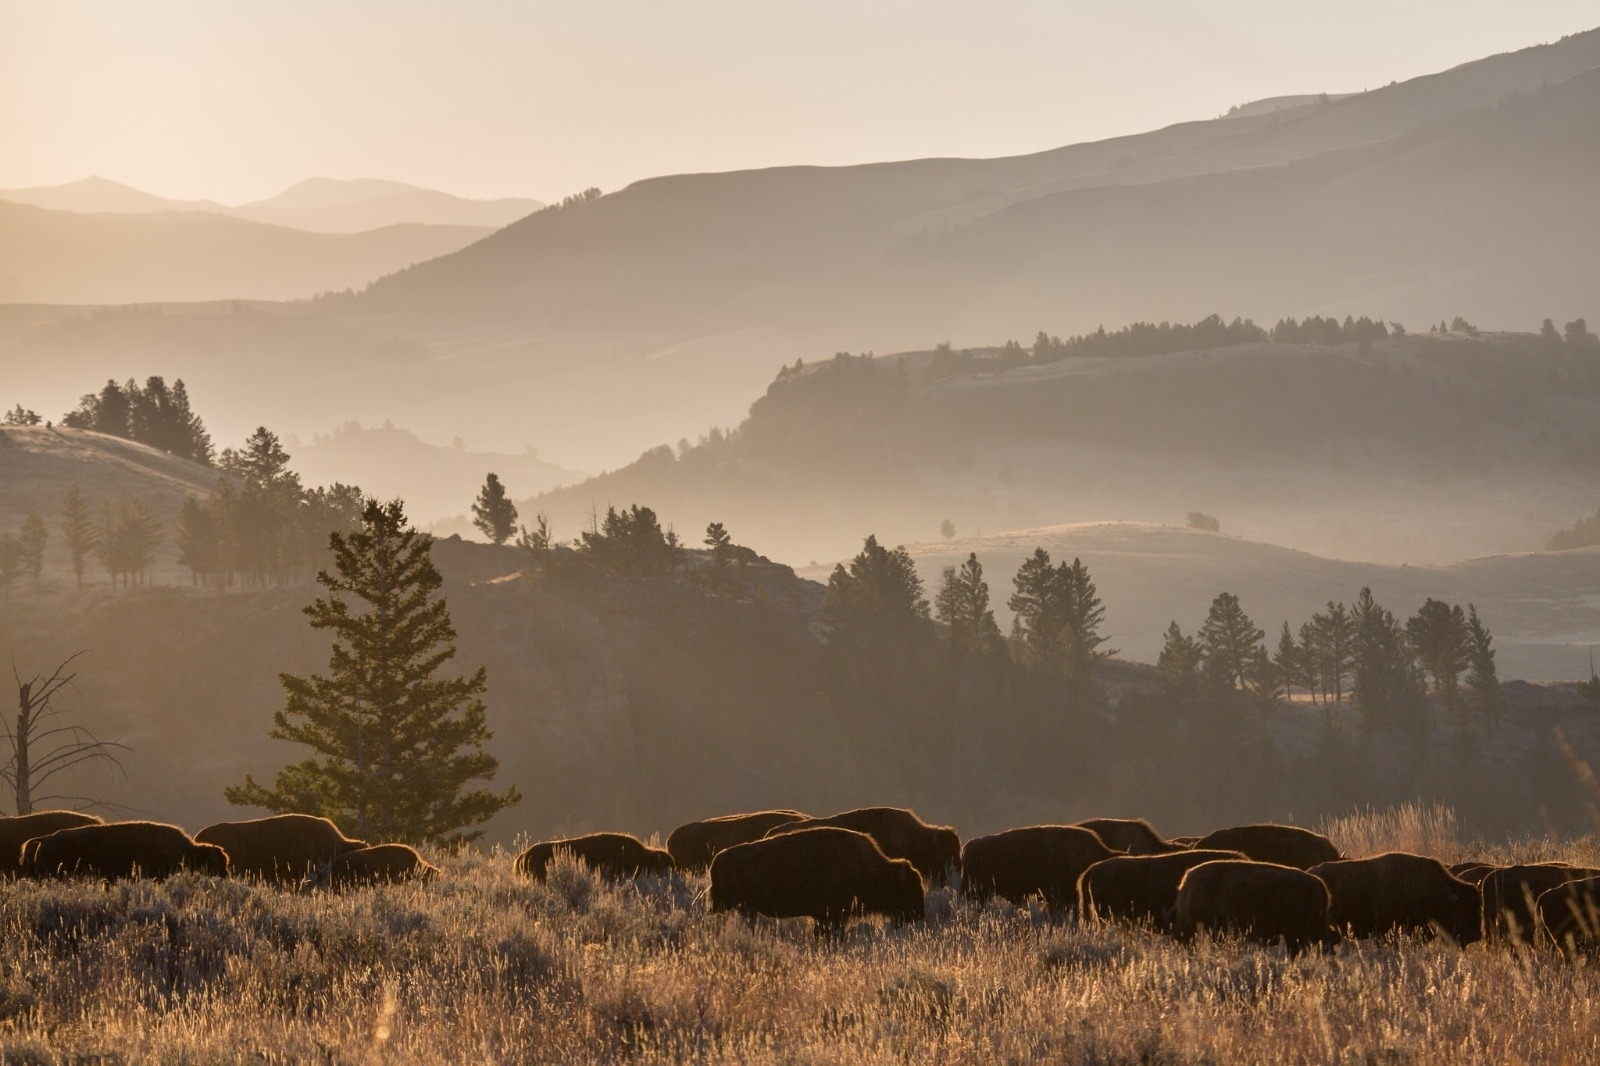 After decades of needless slaughter resulting in the deaths of more than 11,000 Yellowstone bison, Dan Wenk had devoted the final months of his 42-year-career to getting a new bison management plan written with Montana that would bring more tolerance for bison outside the park and reduce the annual death toll.  In fact, Interior Secretary Ryan Zinke tasked Wenk with getting it done. 